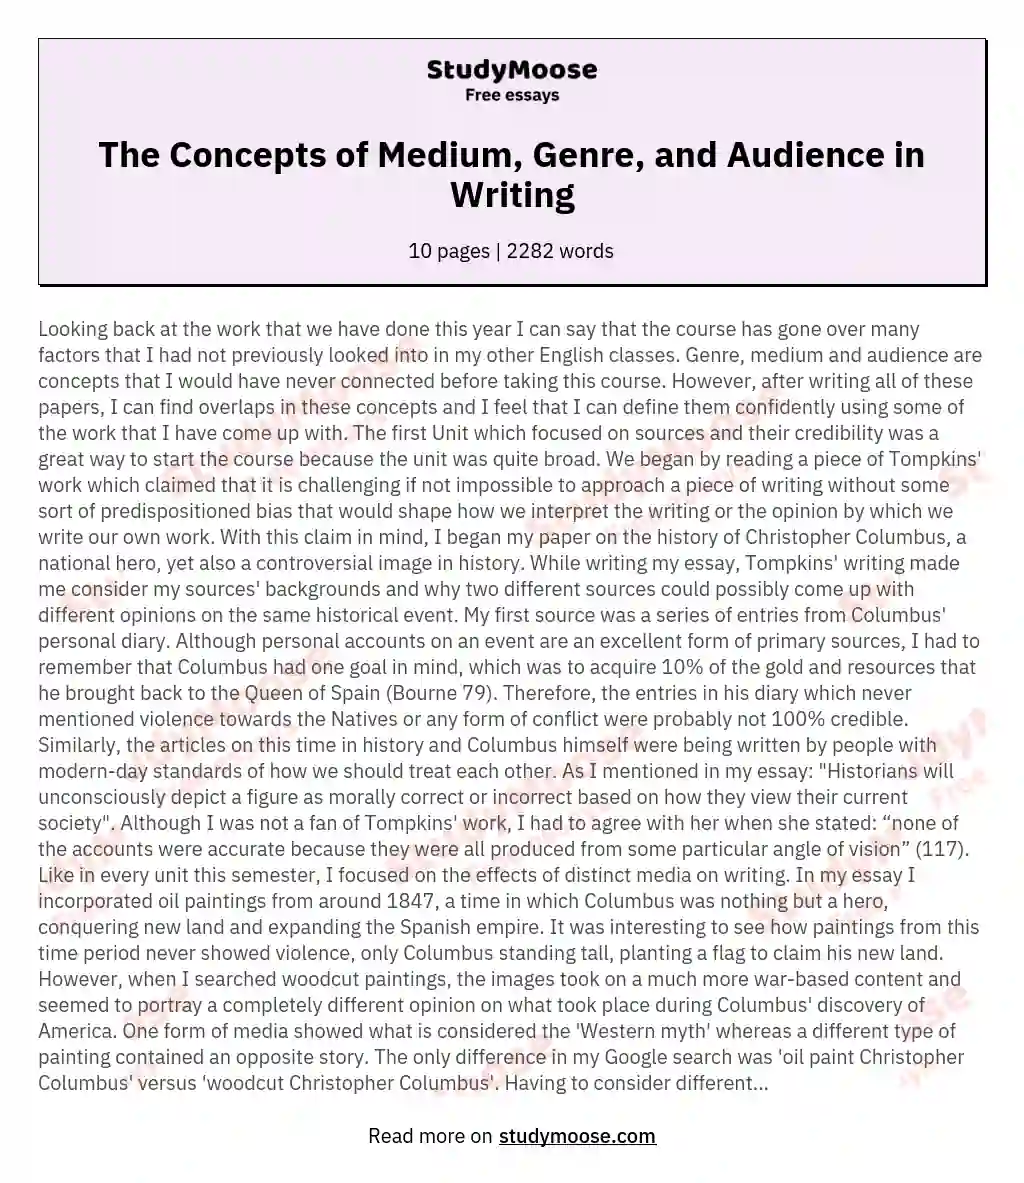 The Concepts of Medium, Genre, and Audience in Writing essay